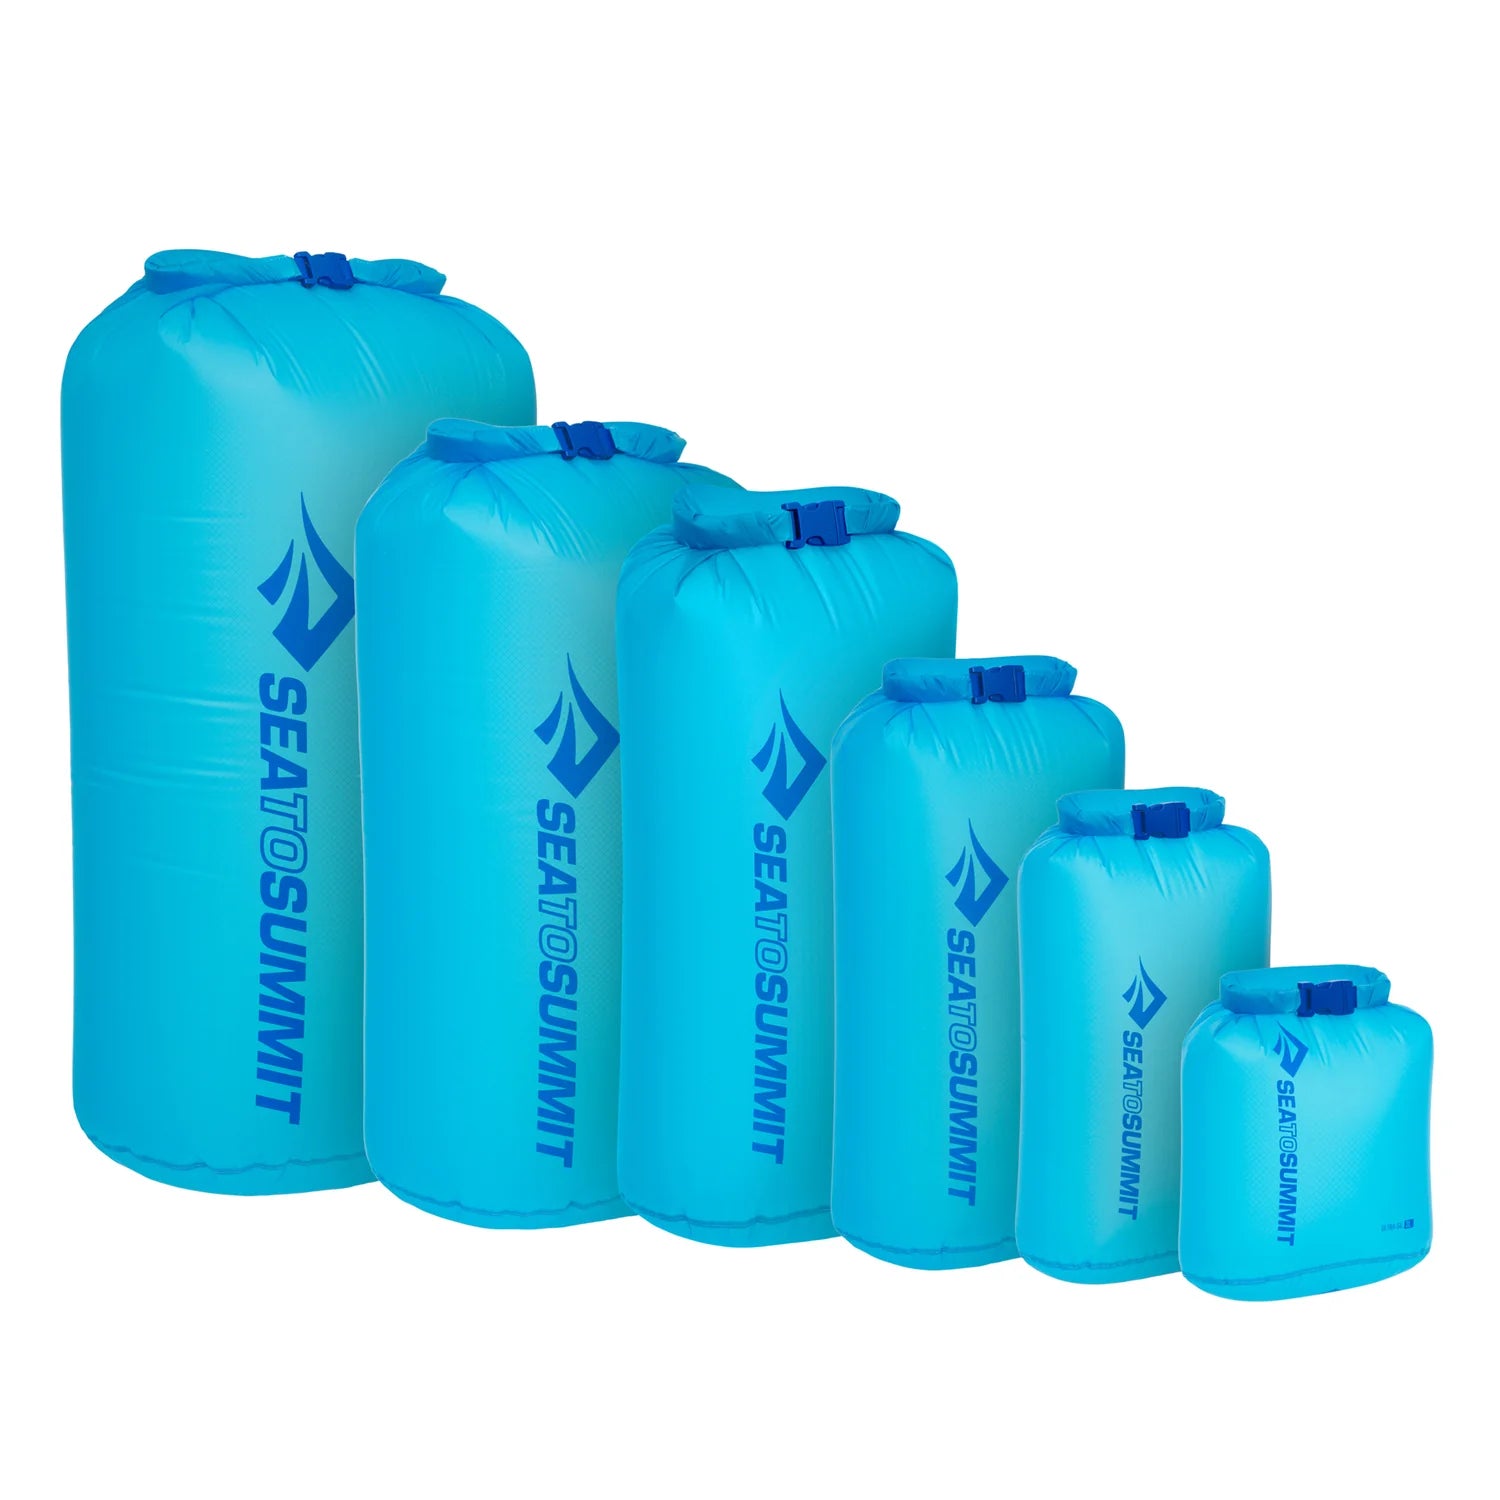 Sea to Summit Ultra Sil Dry Bag 8litre